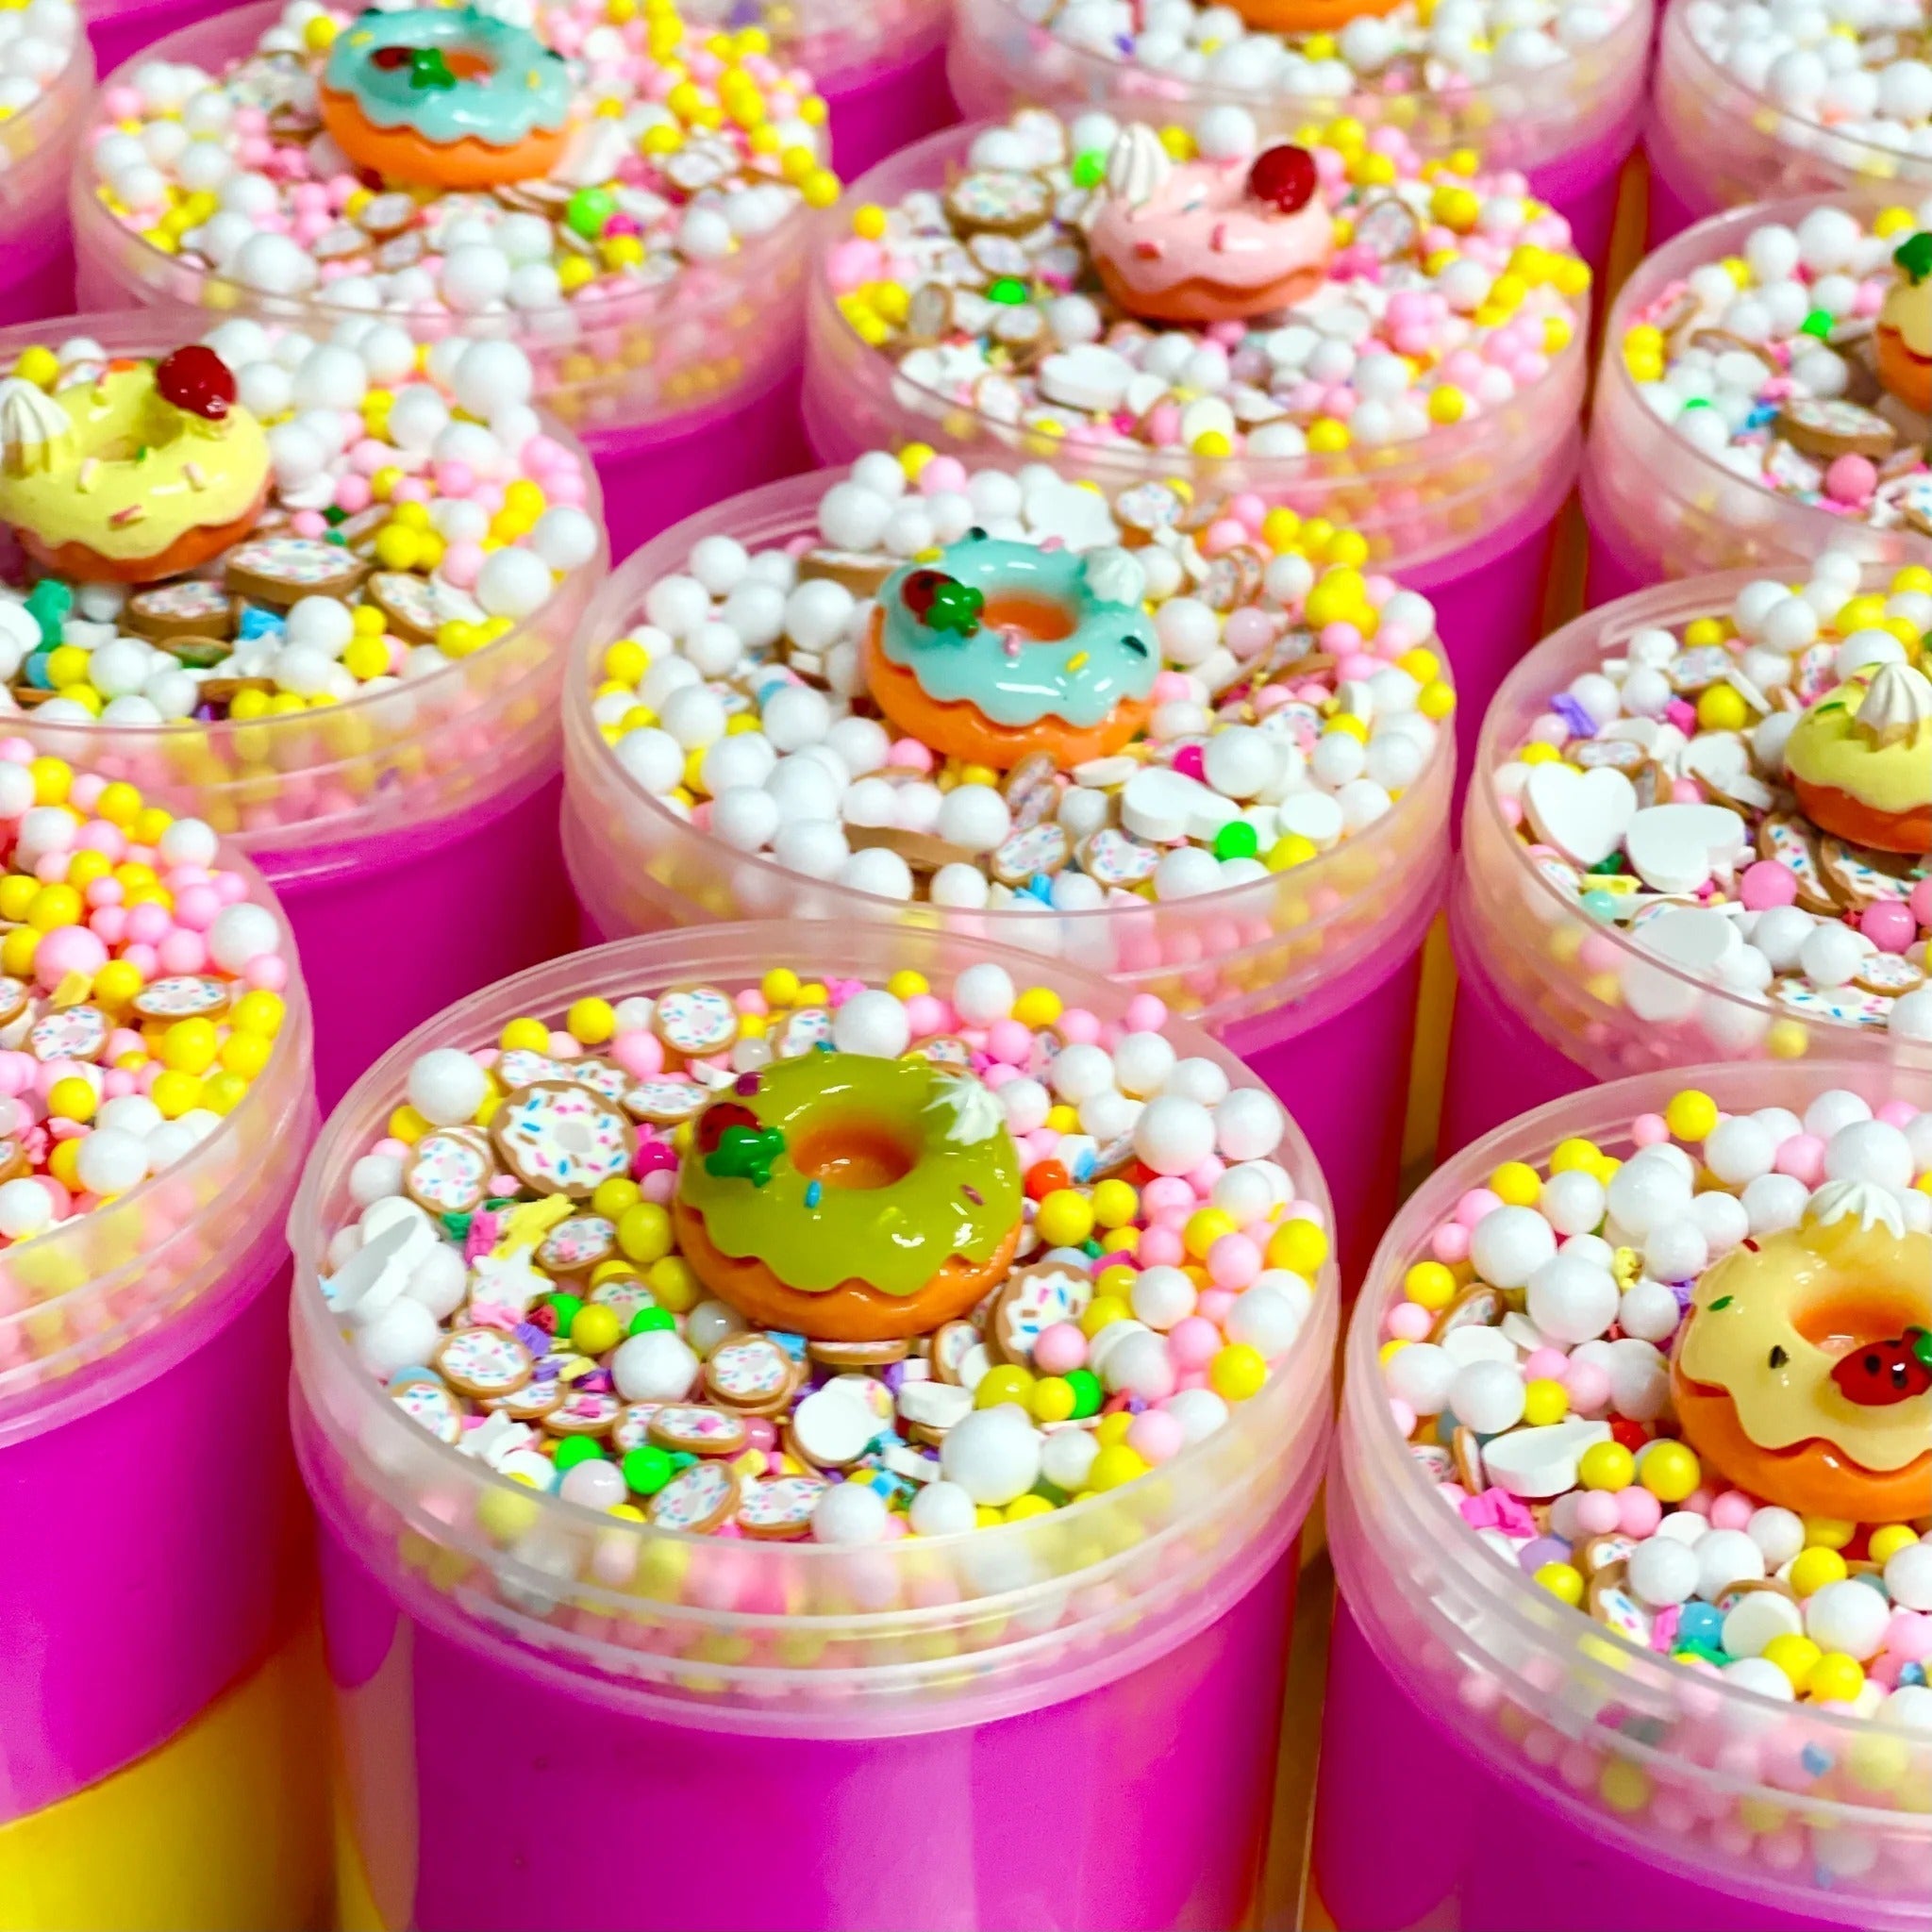 Donut Dash Putty, Our Donut Dash putty is like a birthday party in a jar! The duo of pink and yellow putty perfectly compliment the pink, yellow and white floam beads, adorable donut sprinkles and our marvelous donut charm on top! Putties are air reactive and will dry out of left out. Always return to the container after play with the lid tightly on. Keep away from direct sunlight. Keep away from fabrics and porous surfaces. Container Size: 275ml Ages 5+, Adult supervision recommended. Donut Dash Putty Wash